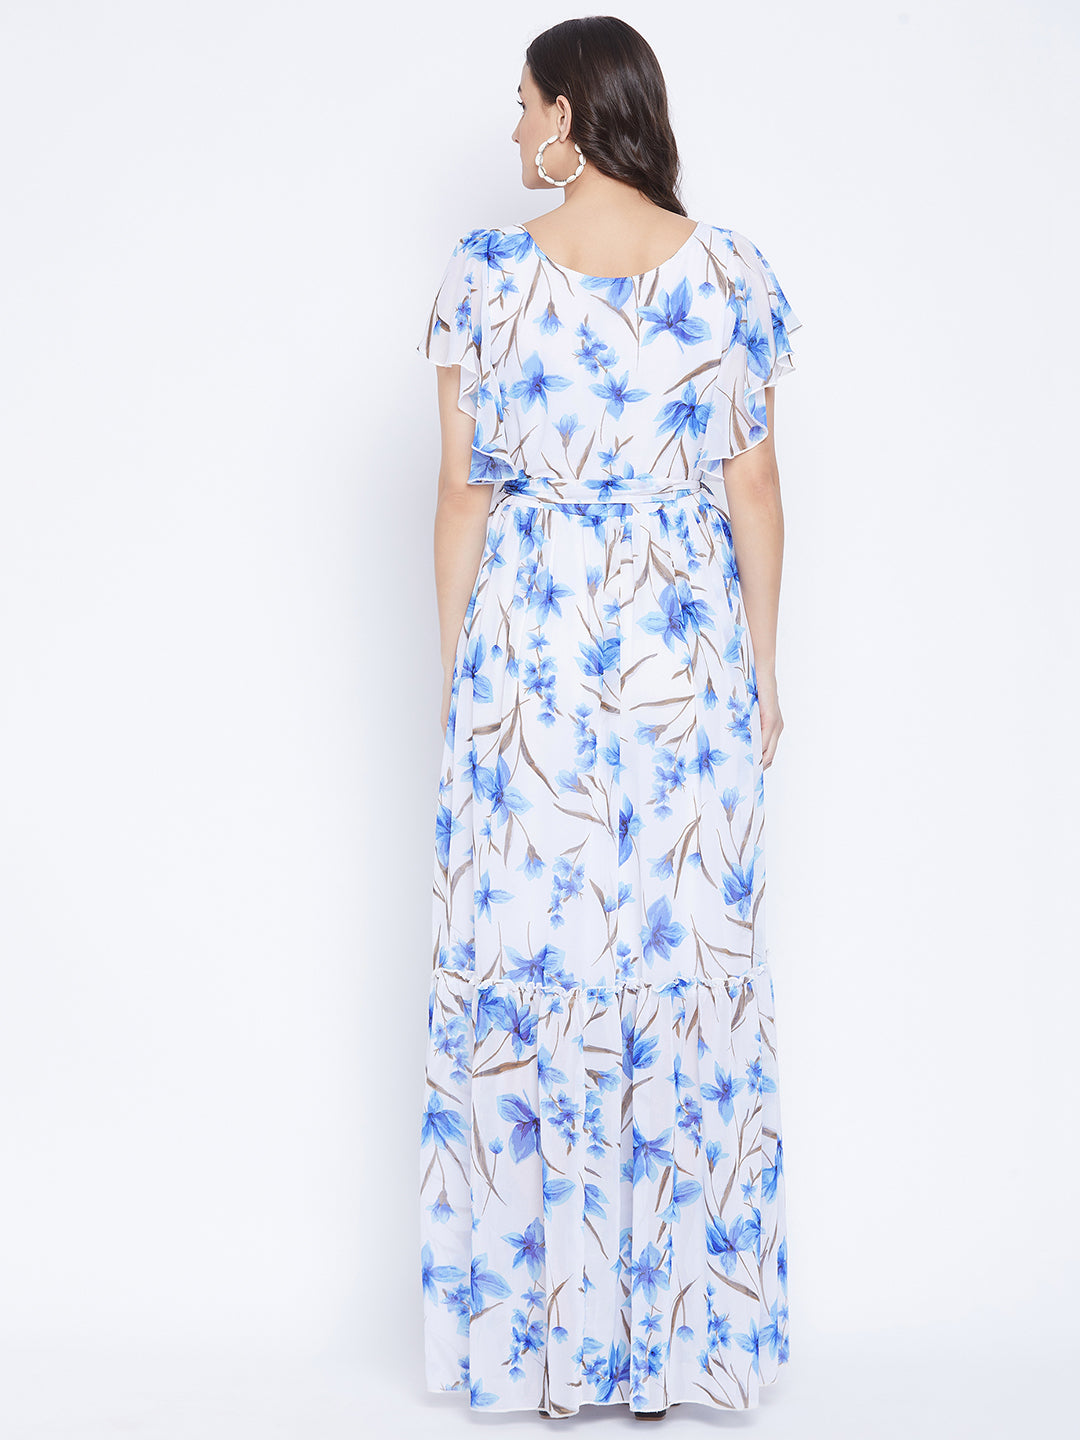 Printed Tiered Maxi Dress